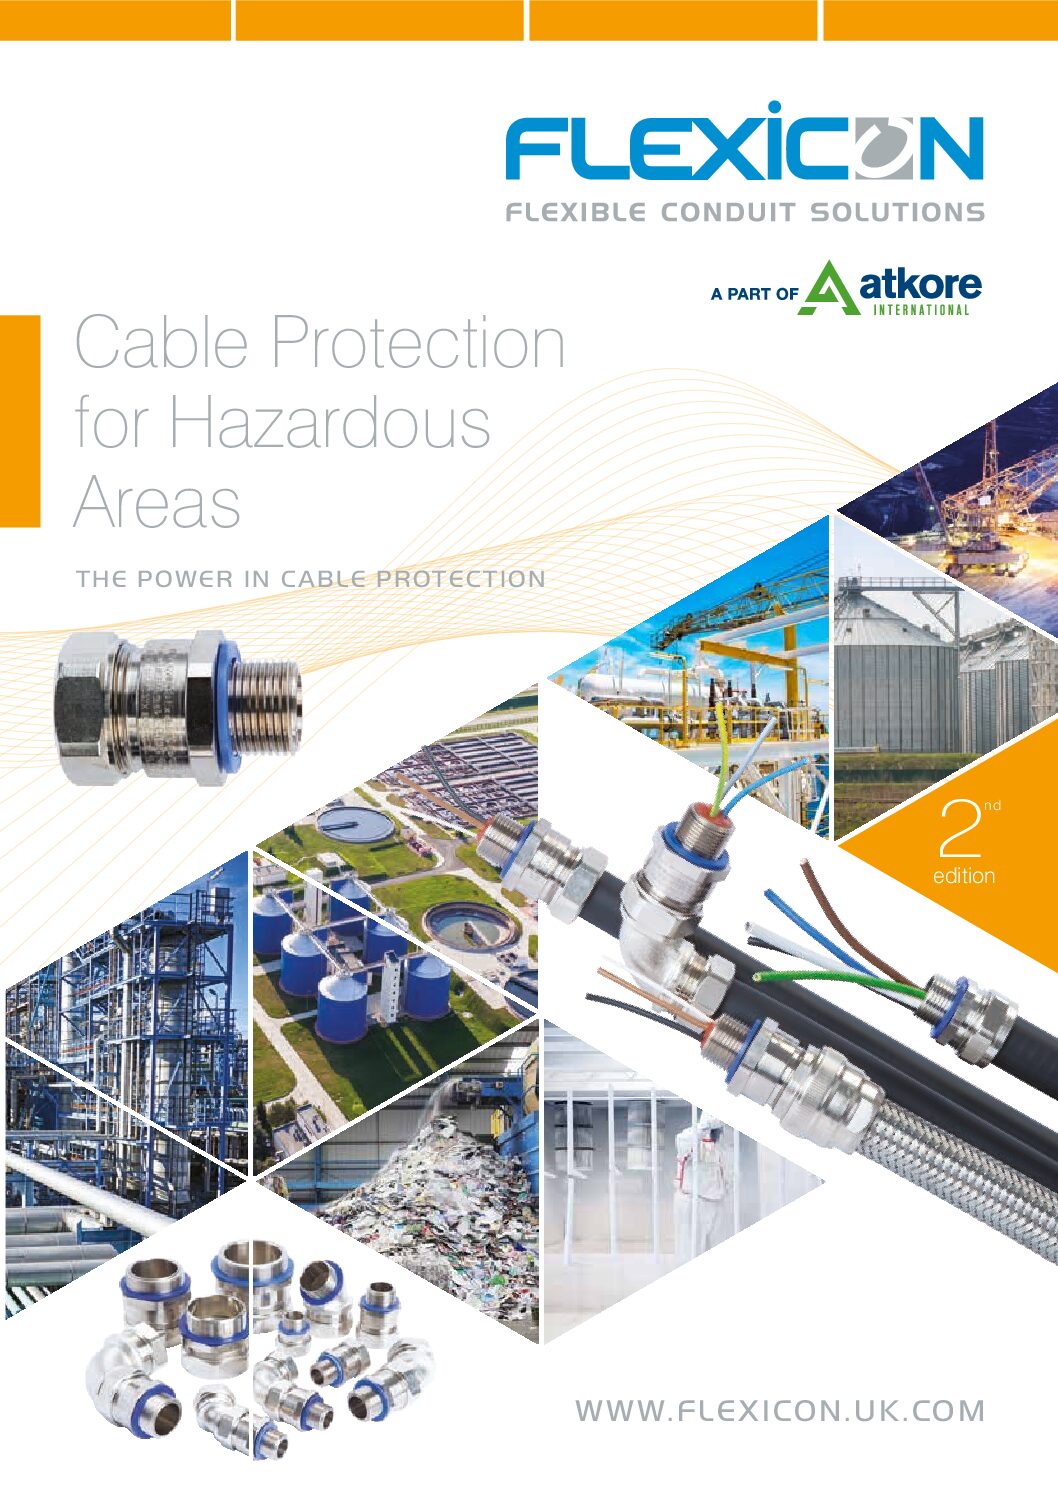 Cable Protection for Hazardous Areas